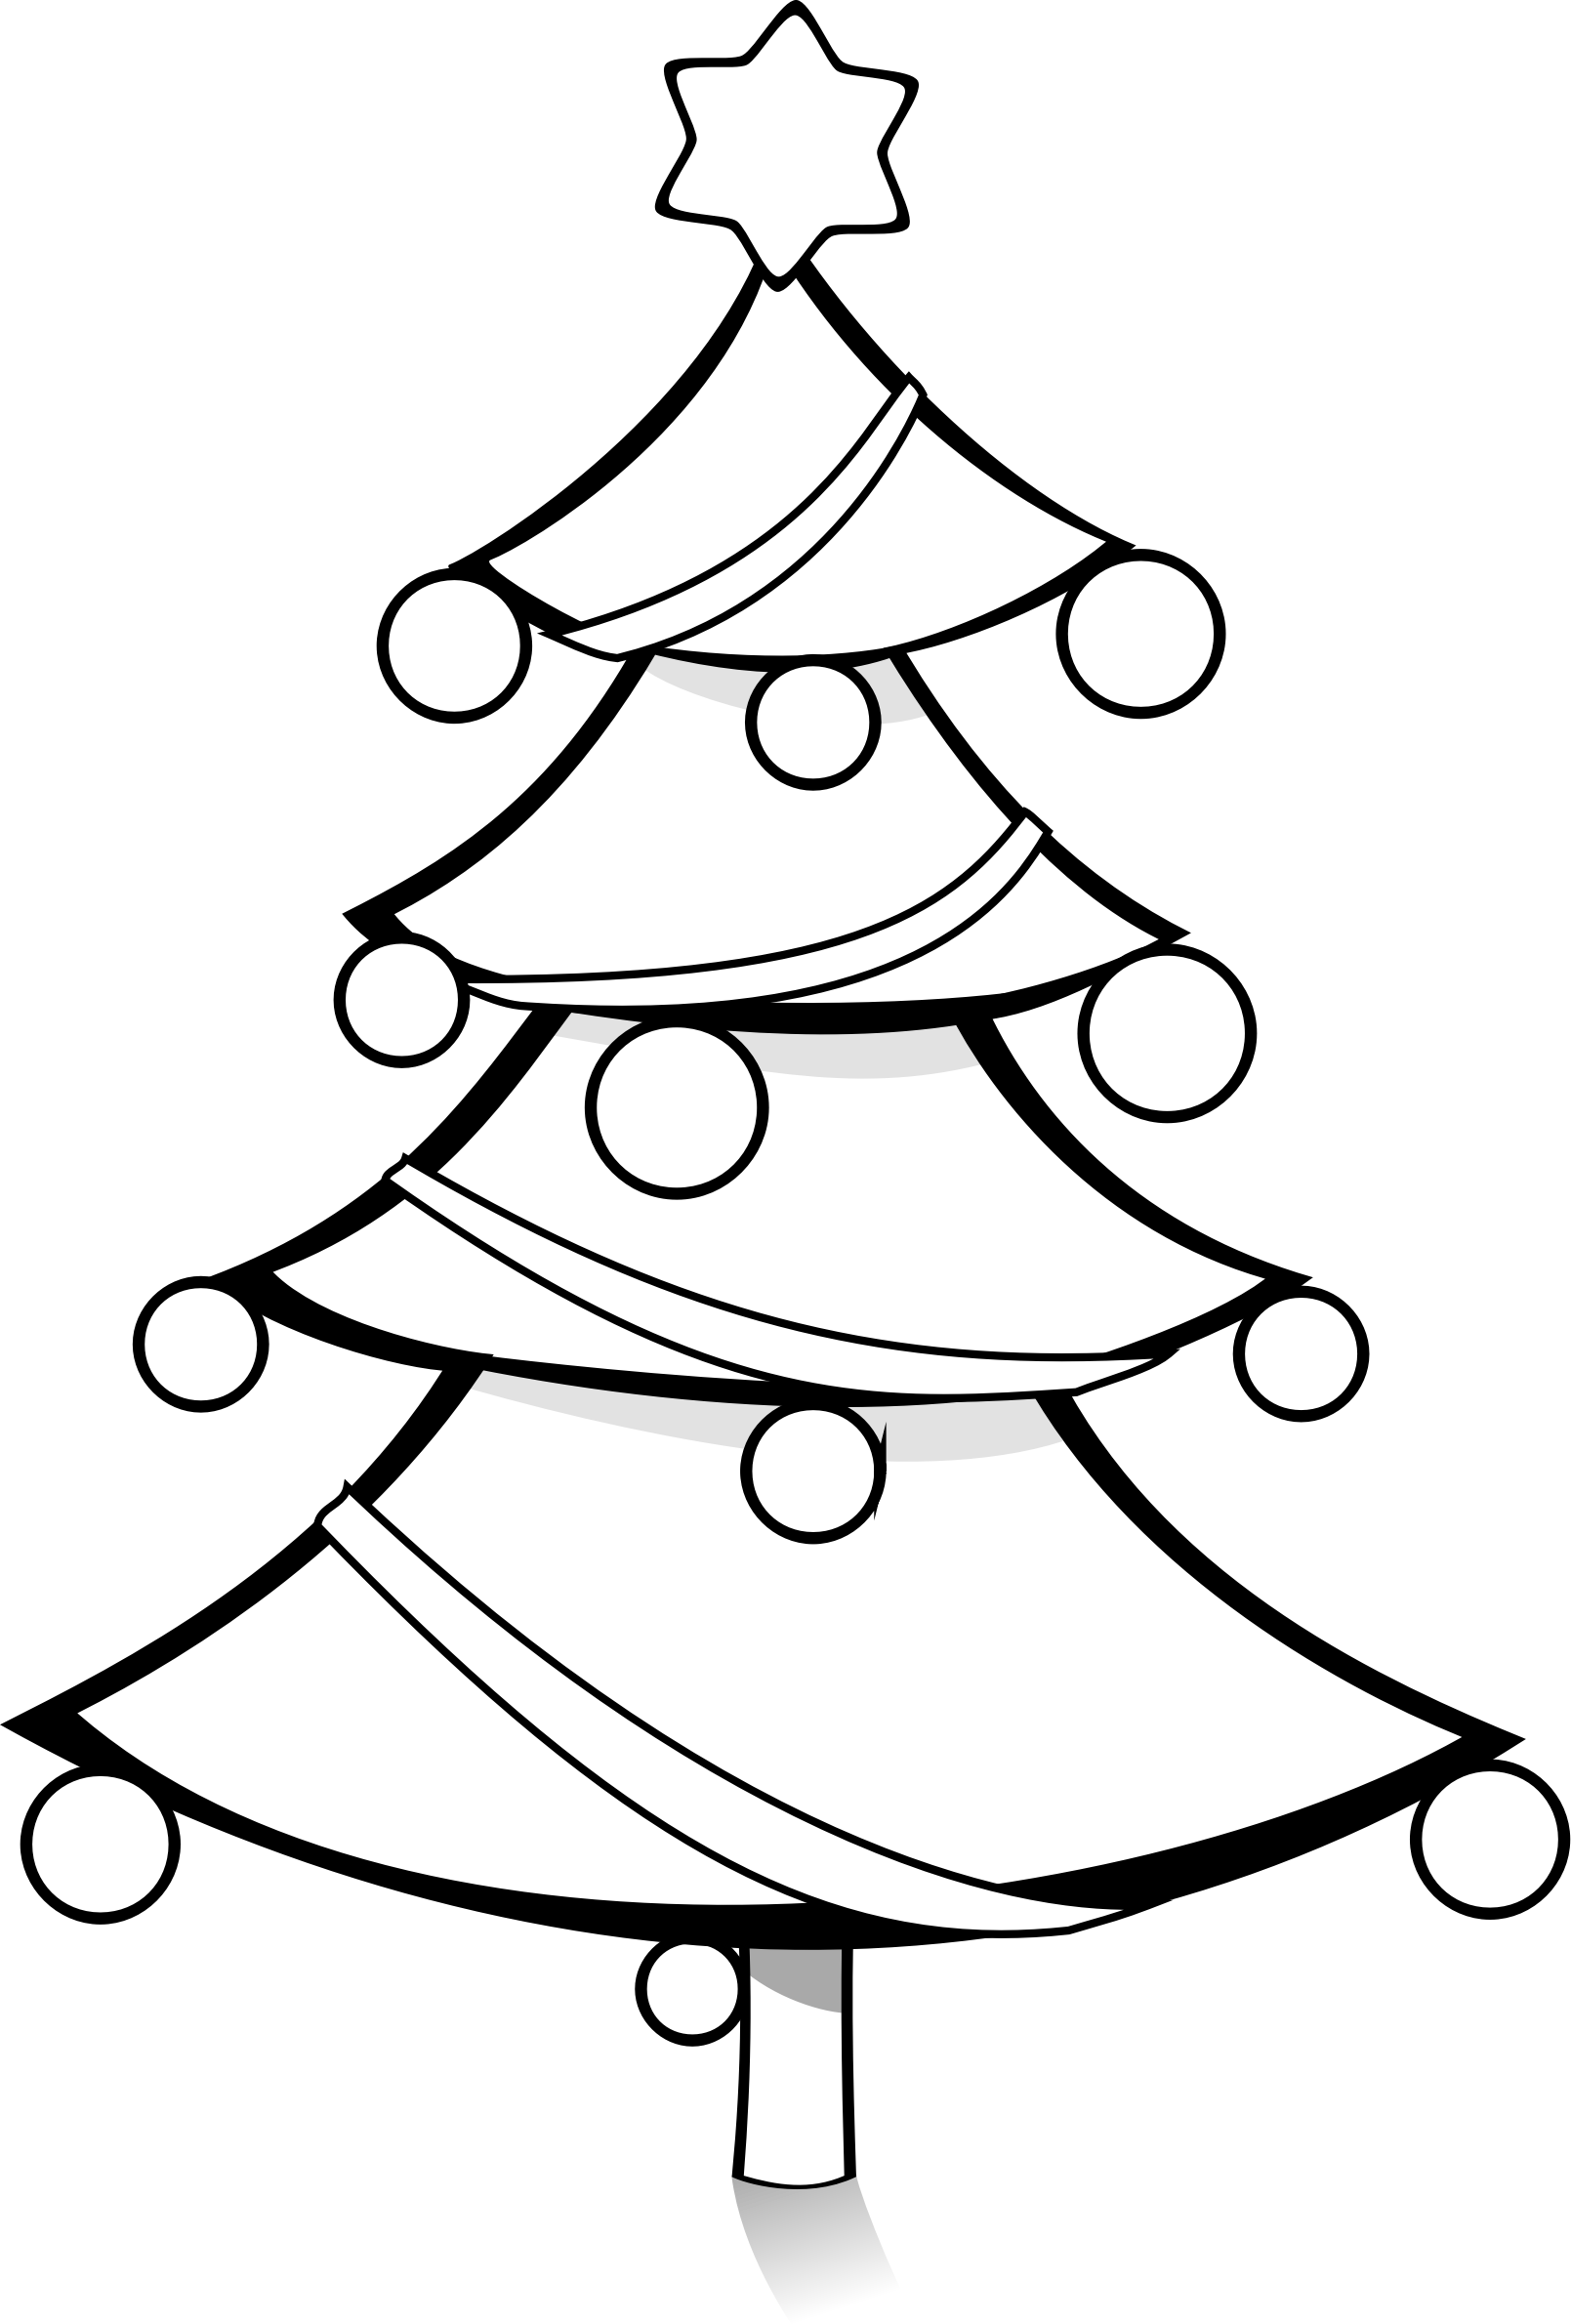 Christmas Tree Clipart Black And White Clipart Christmas Tree